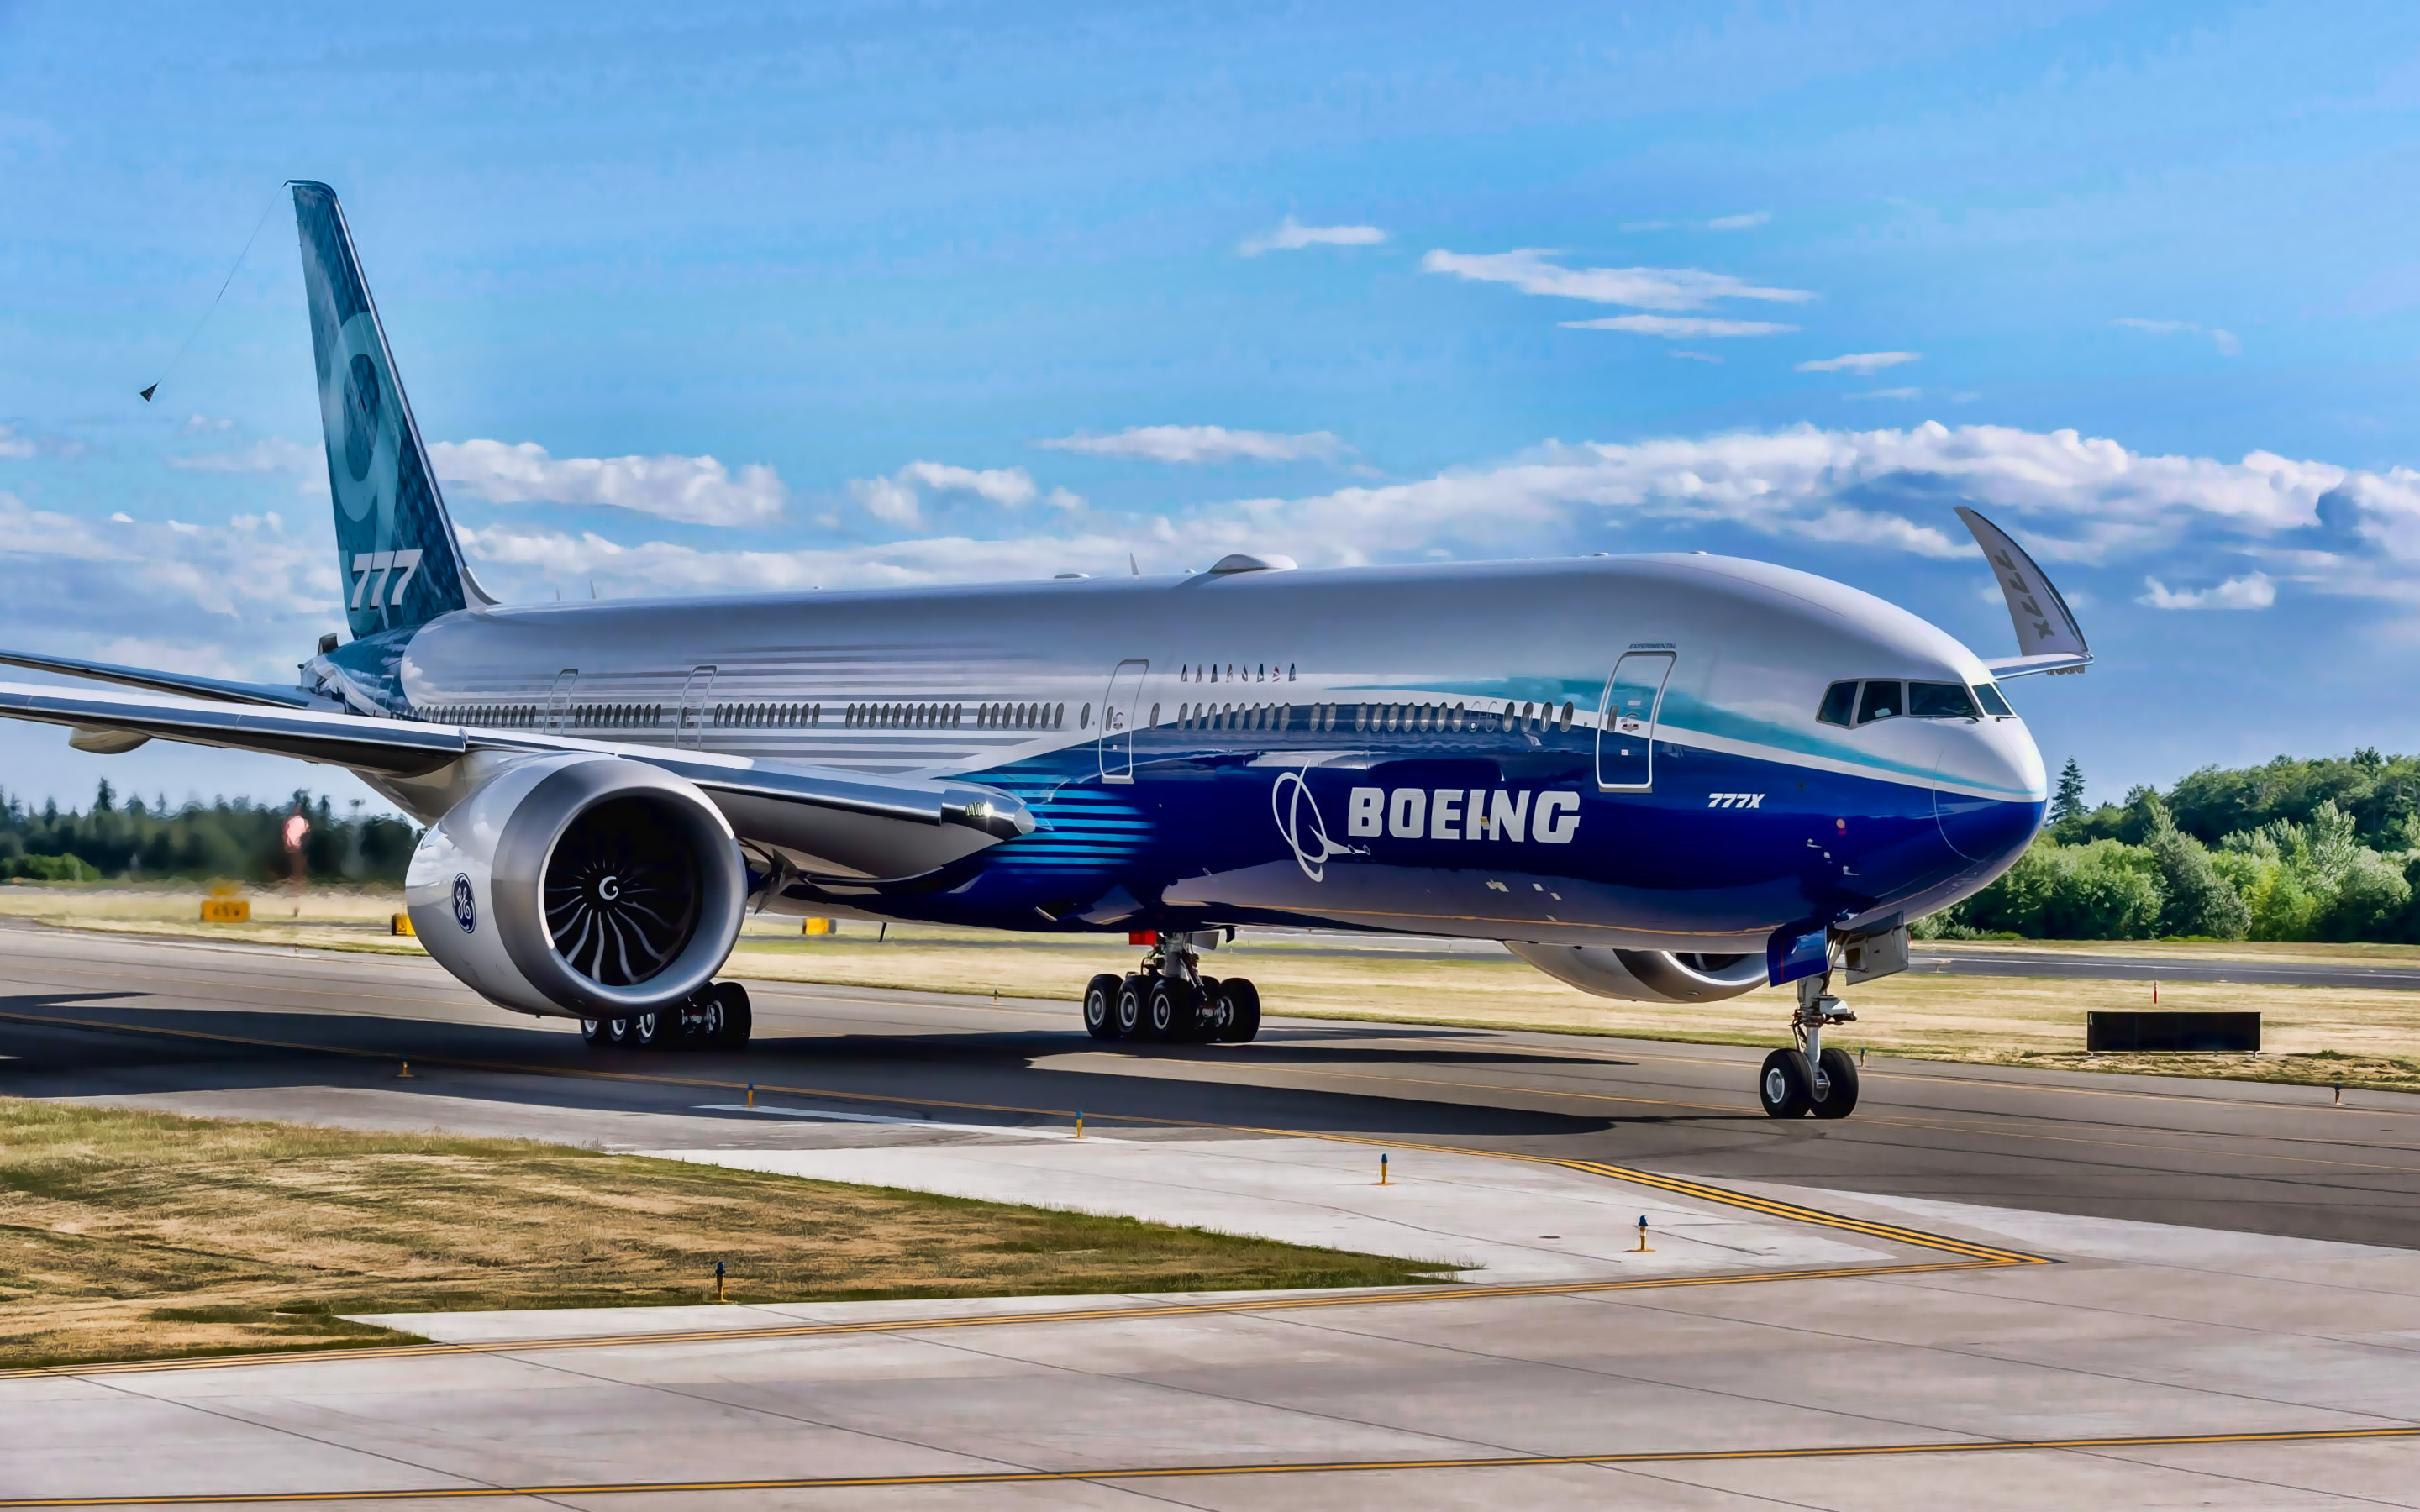 Boeing wallpapers, HD pictures, collection, High-quality customization, 2880x1800 HD Desktop